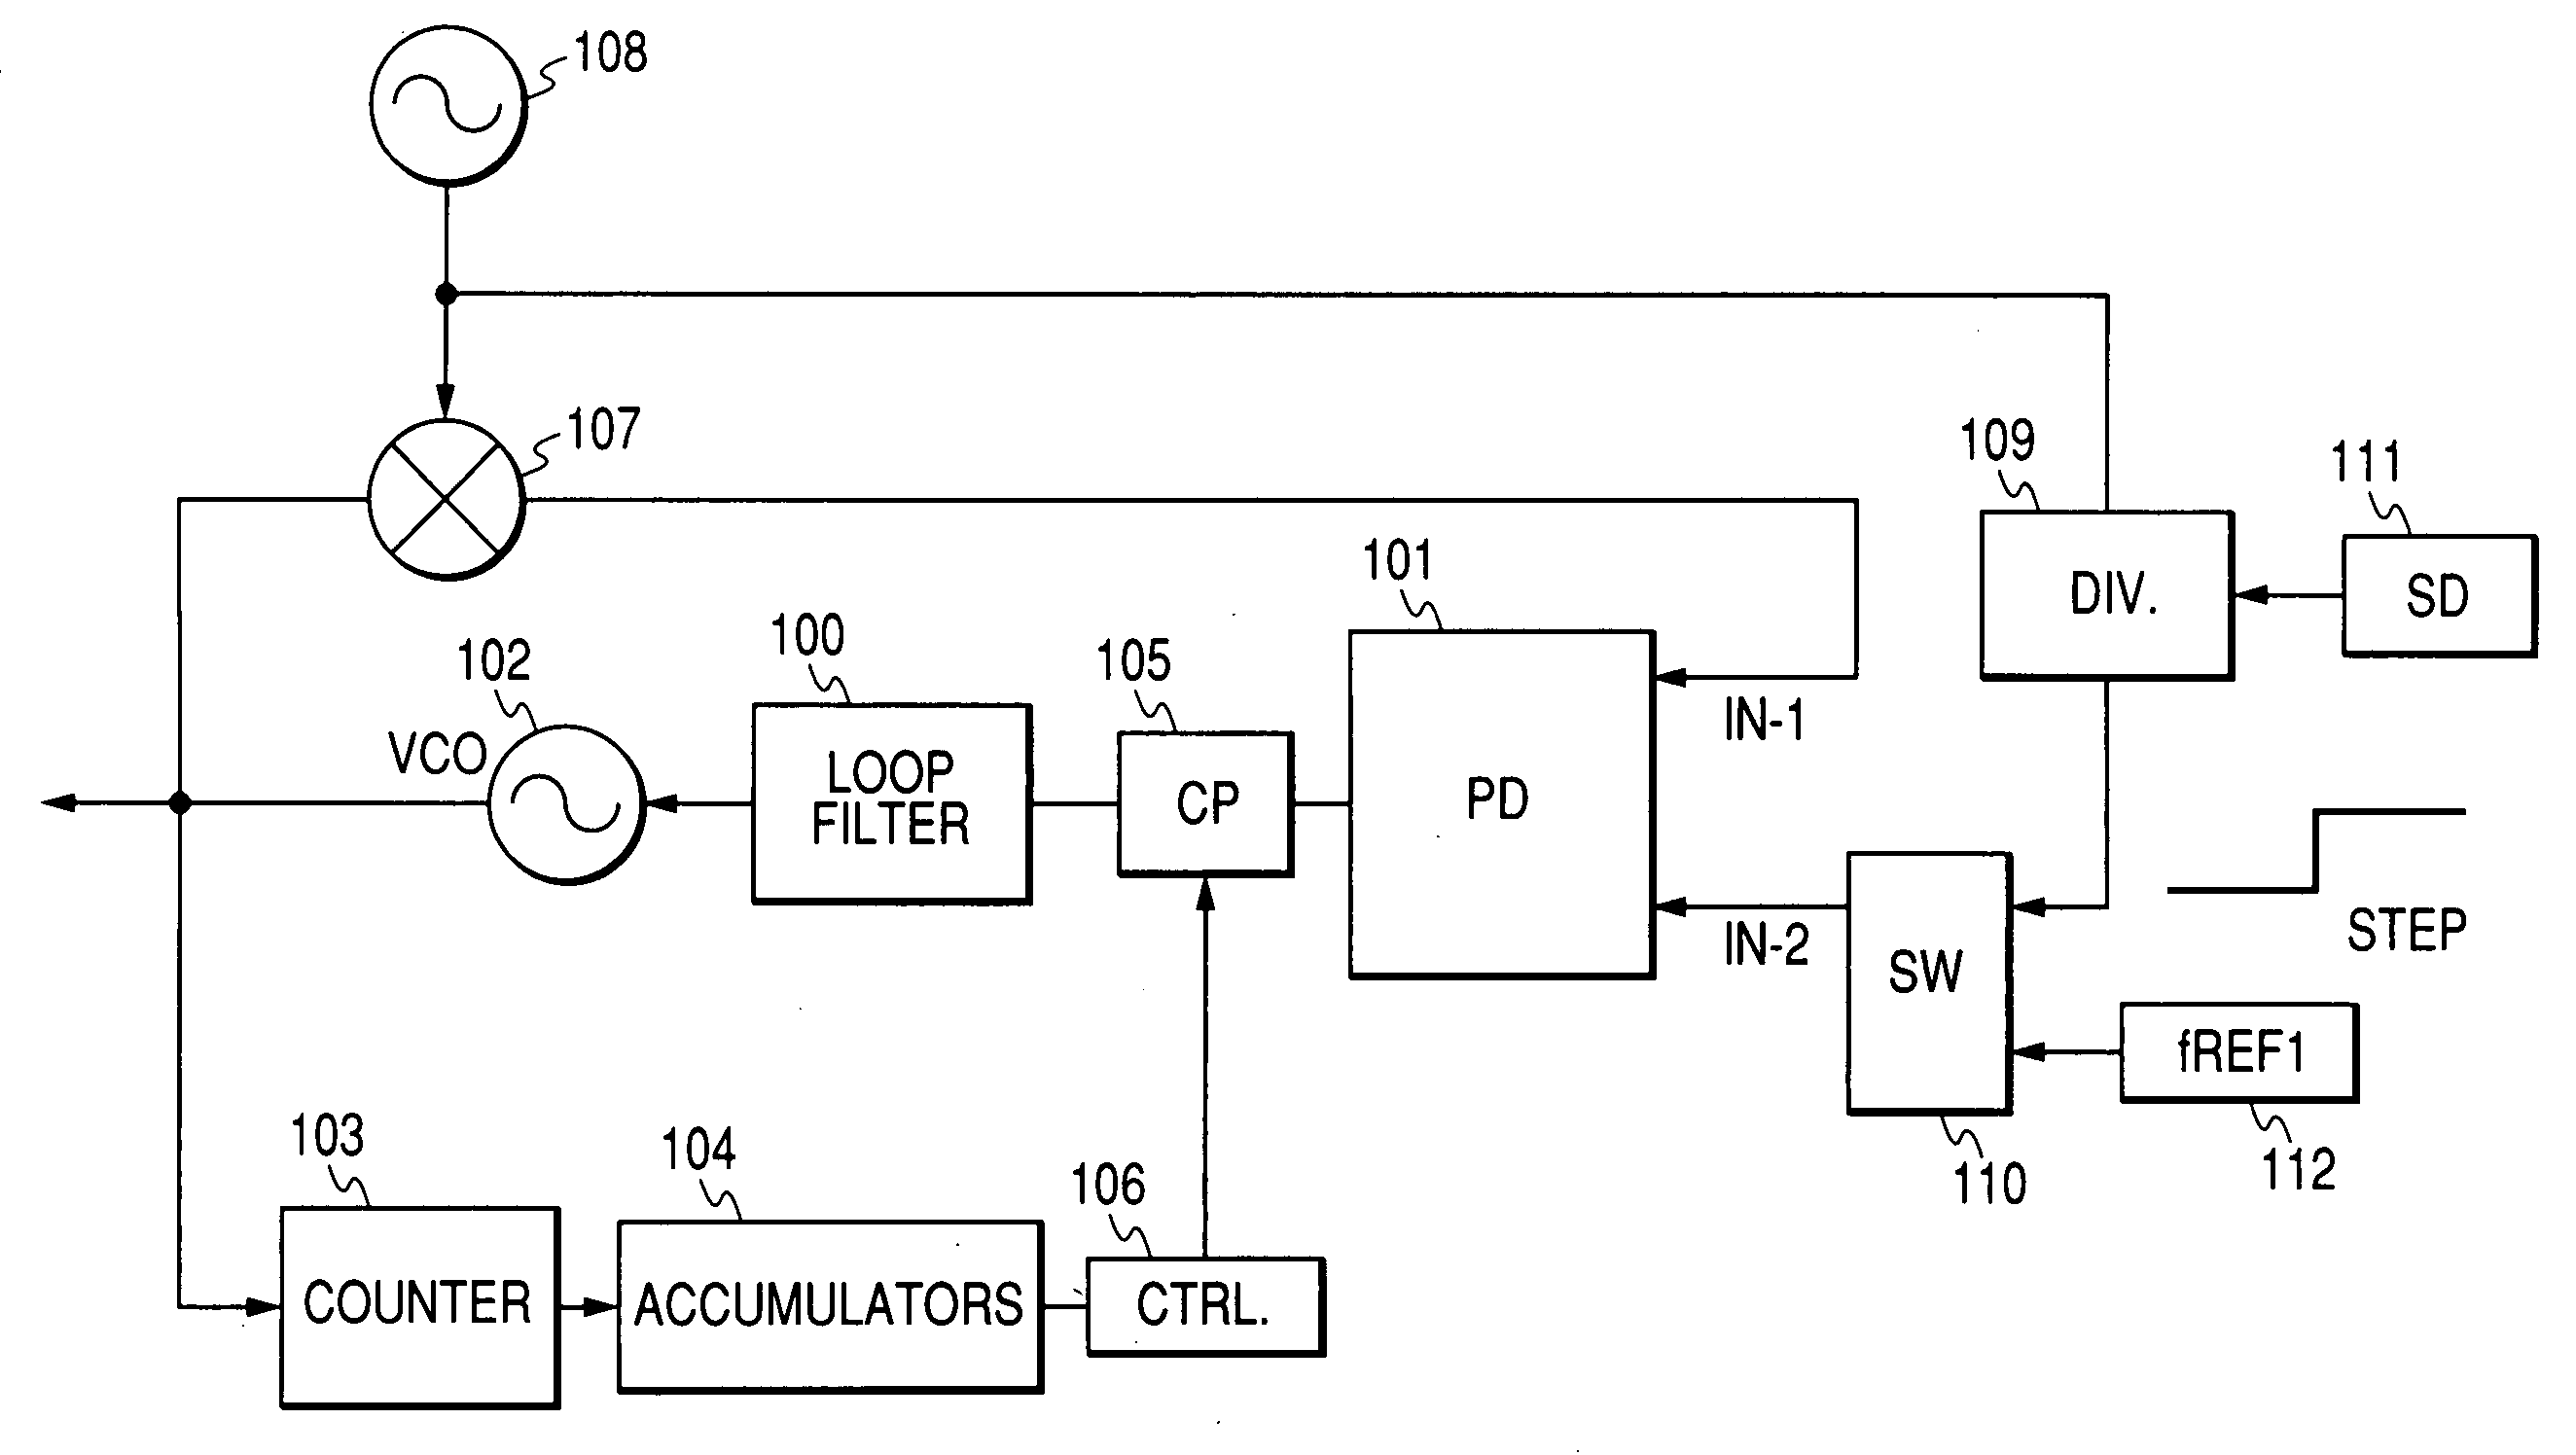 Phase locked loop circuits, offset PLL transmitters, radio frequency integrated circuits and mobile phone systems